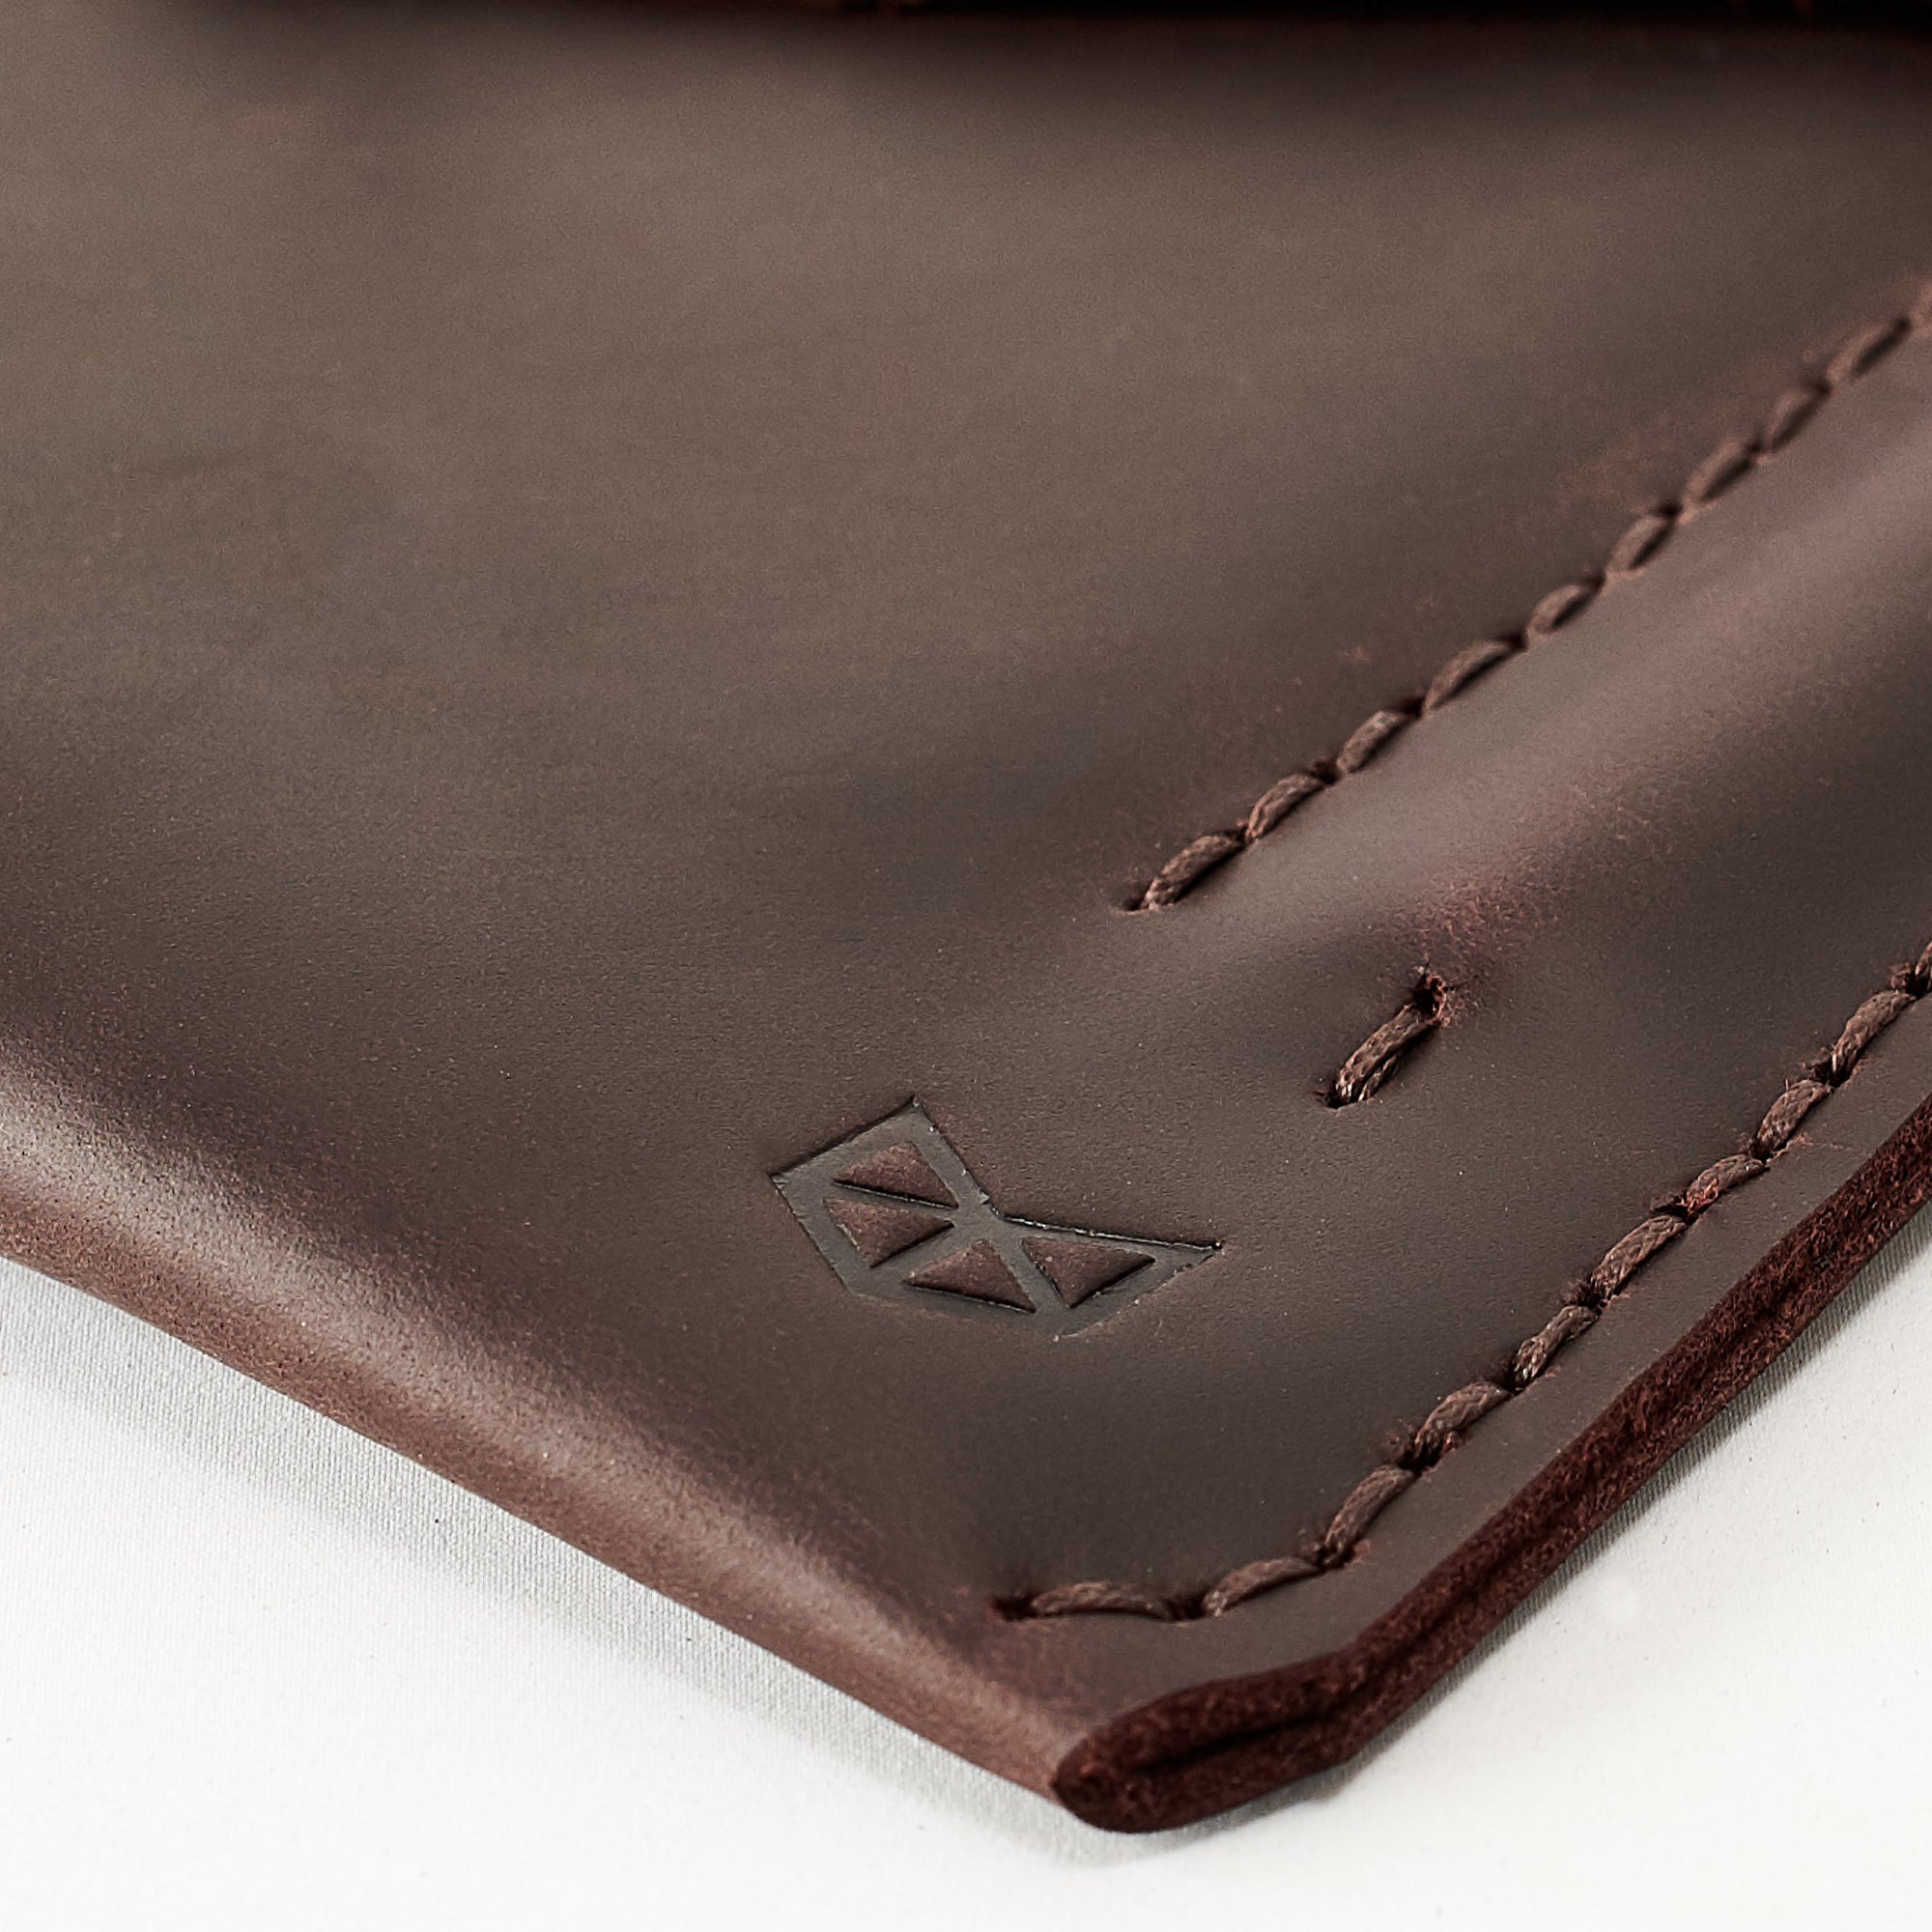 Hand Stitched. iPad Sleeve. iPad Leather Case Marron With Apple Pencil Holder by Capra Leather